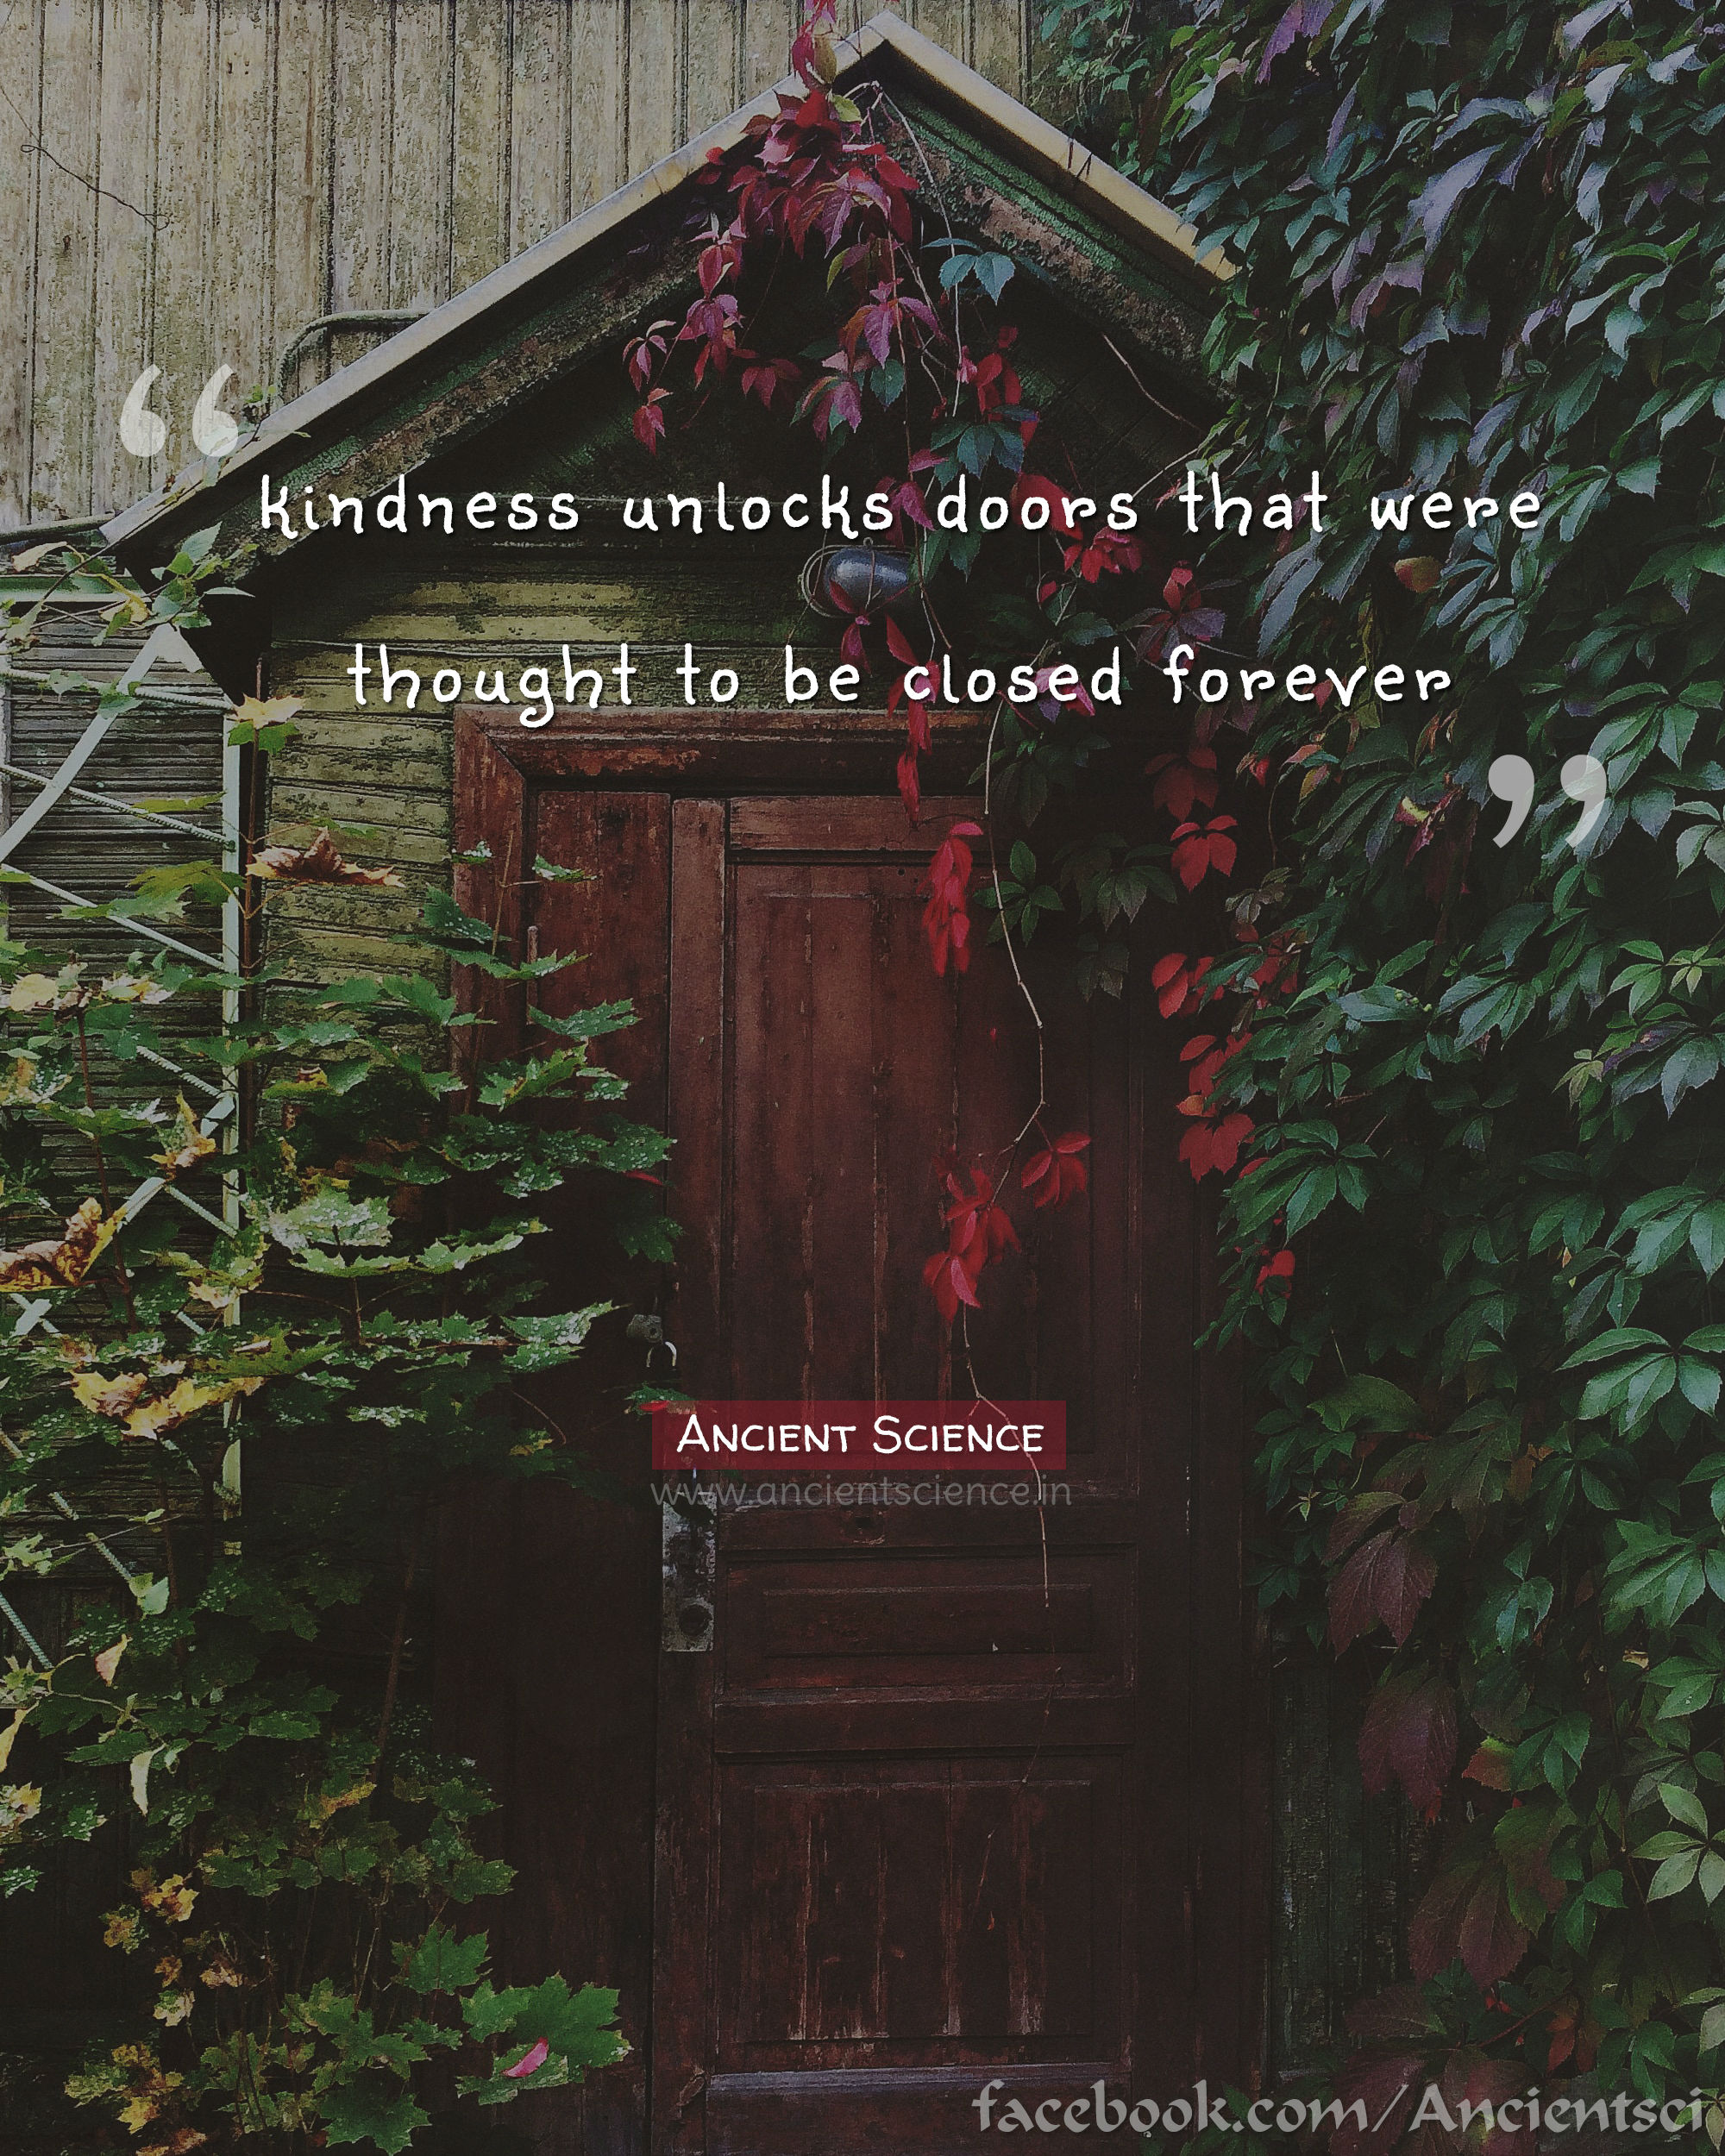 Kindness unlocks doors that were thought to be closed forever.